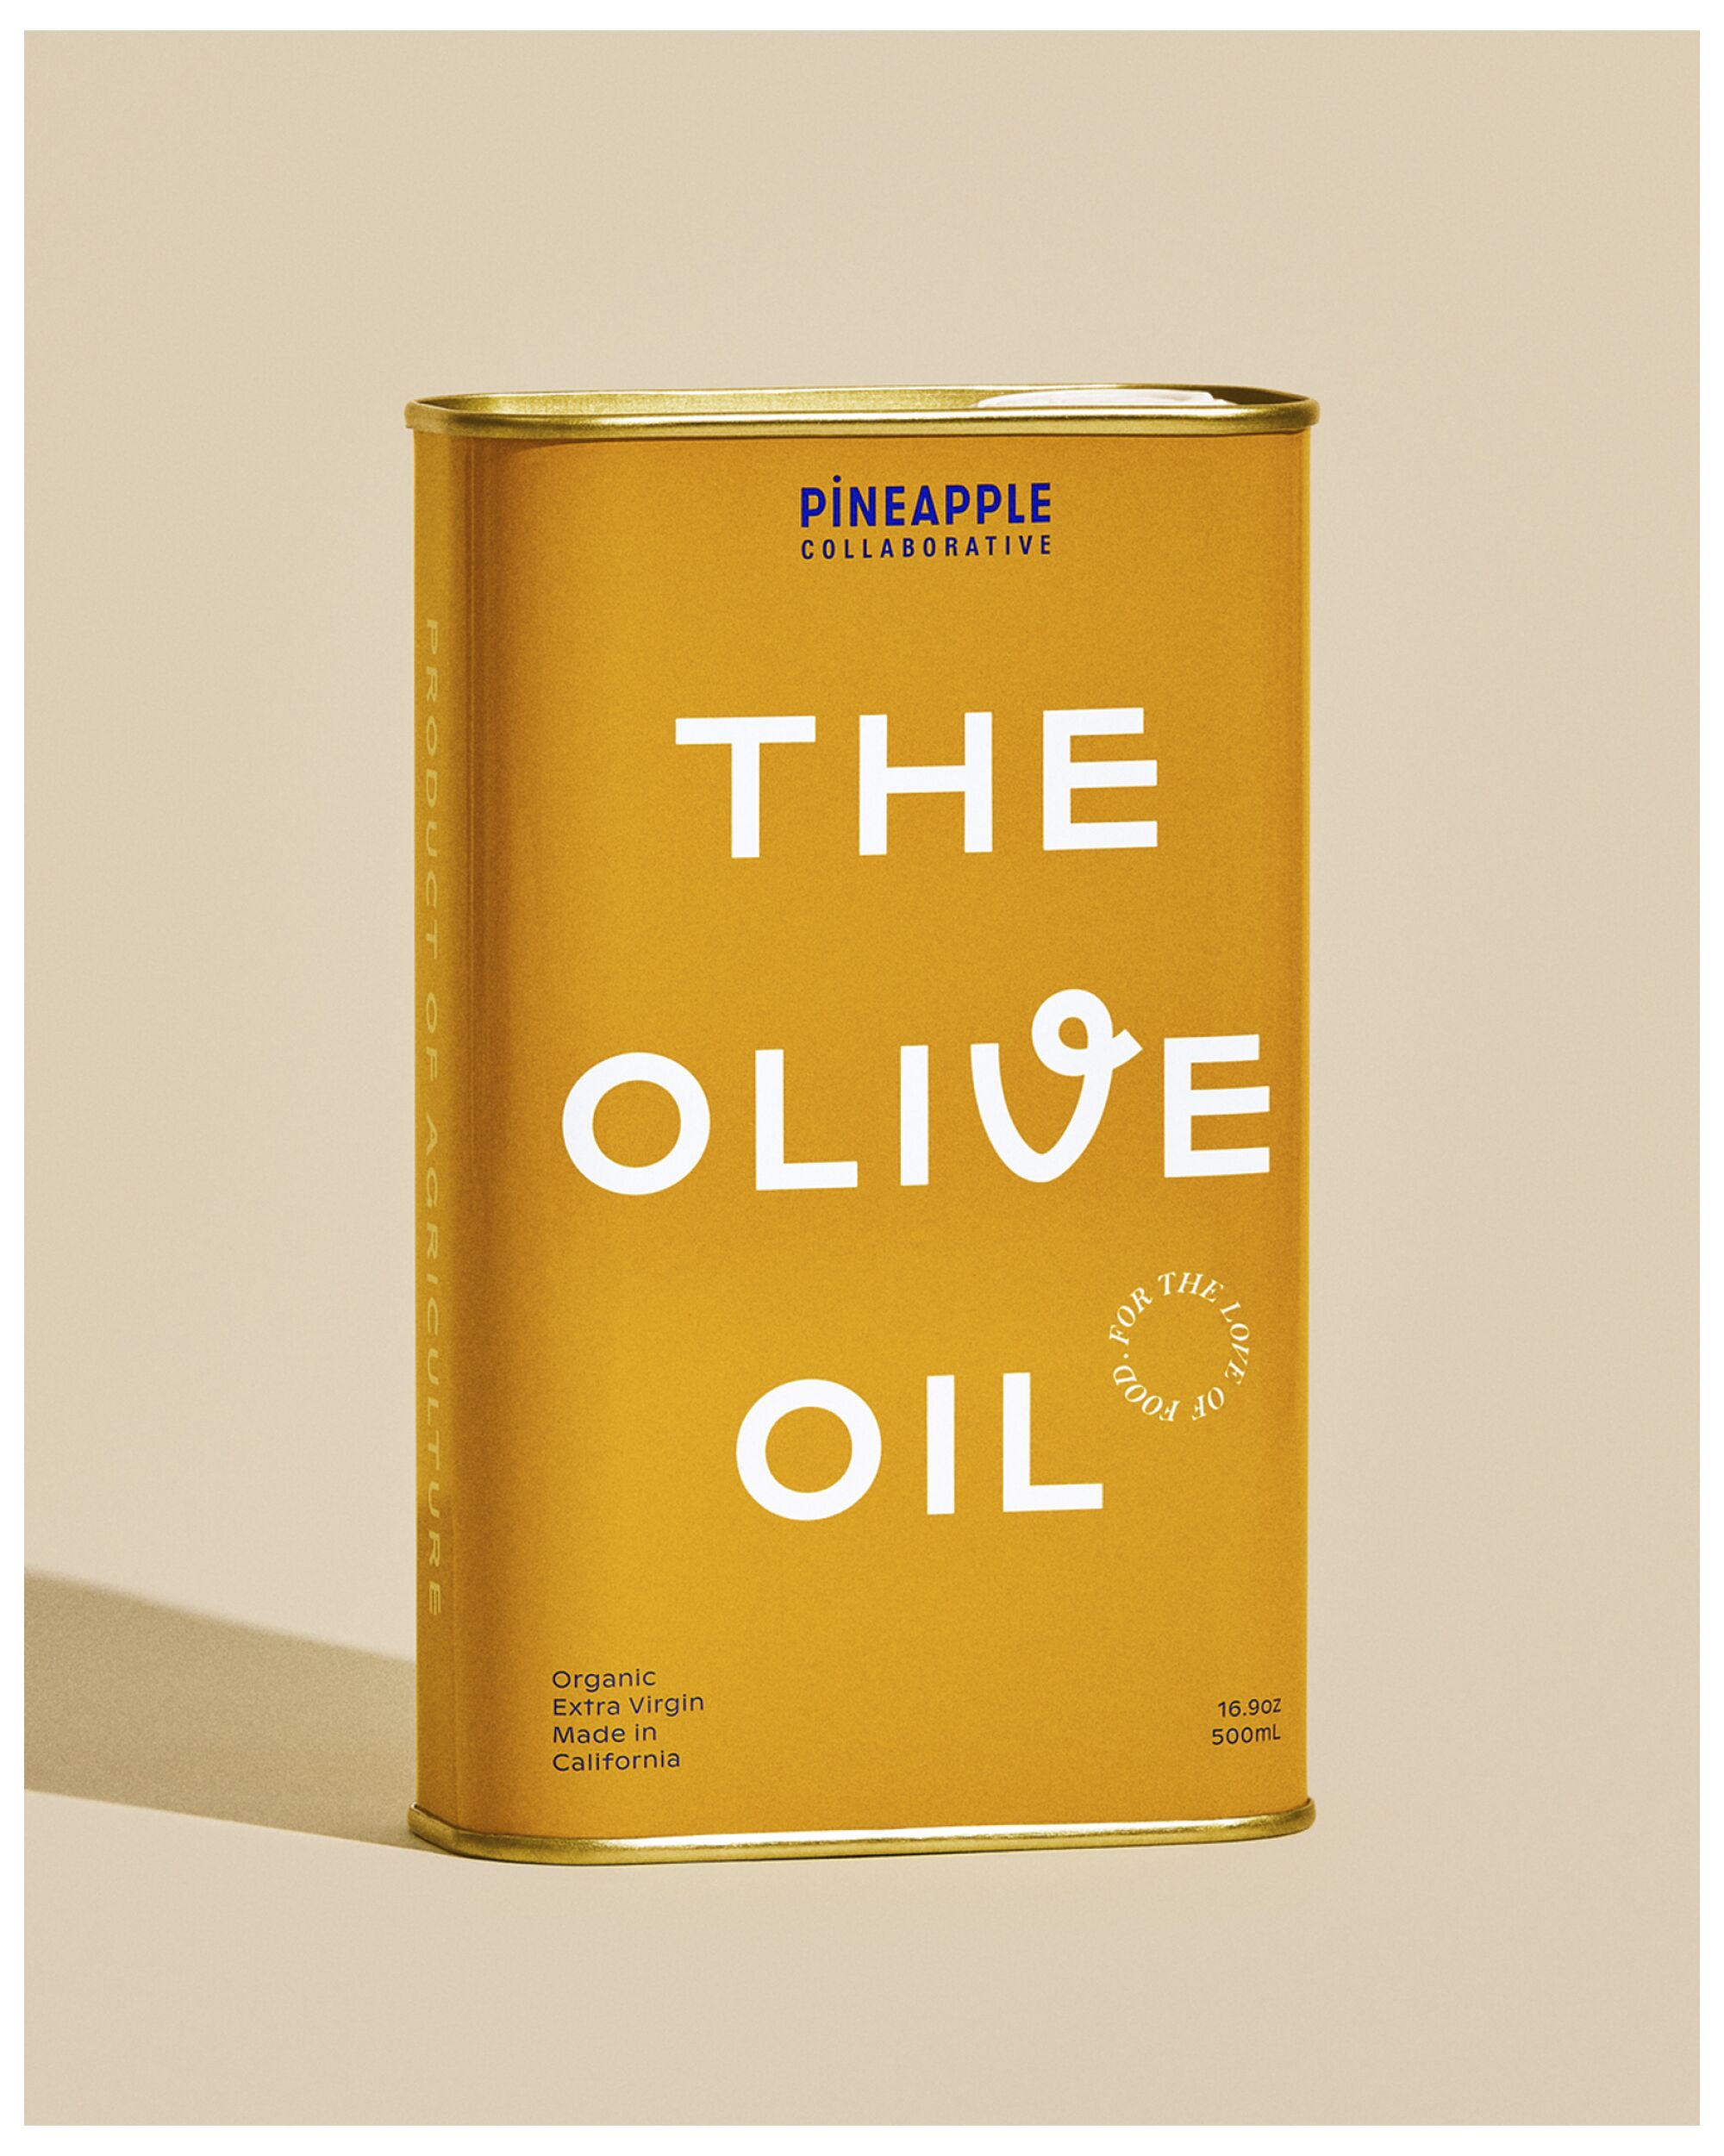 The Pineapple Collaborative Olive Oil 